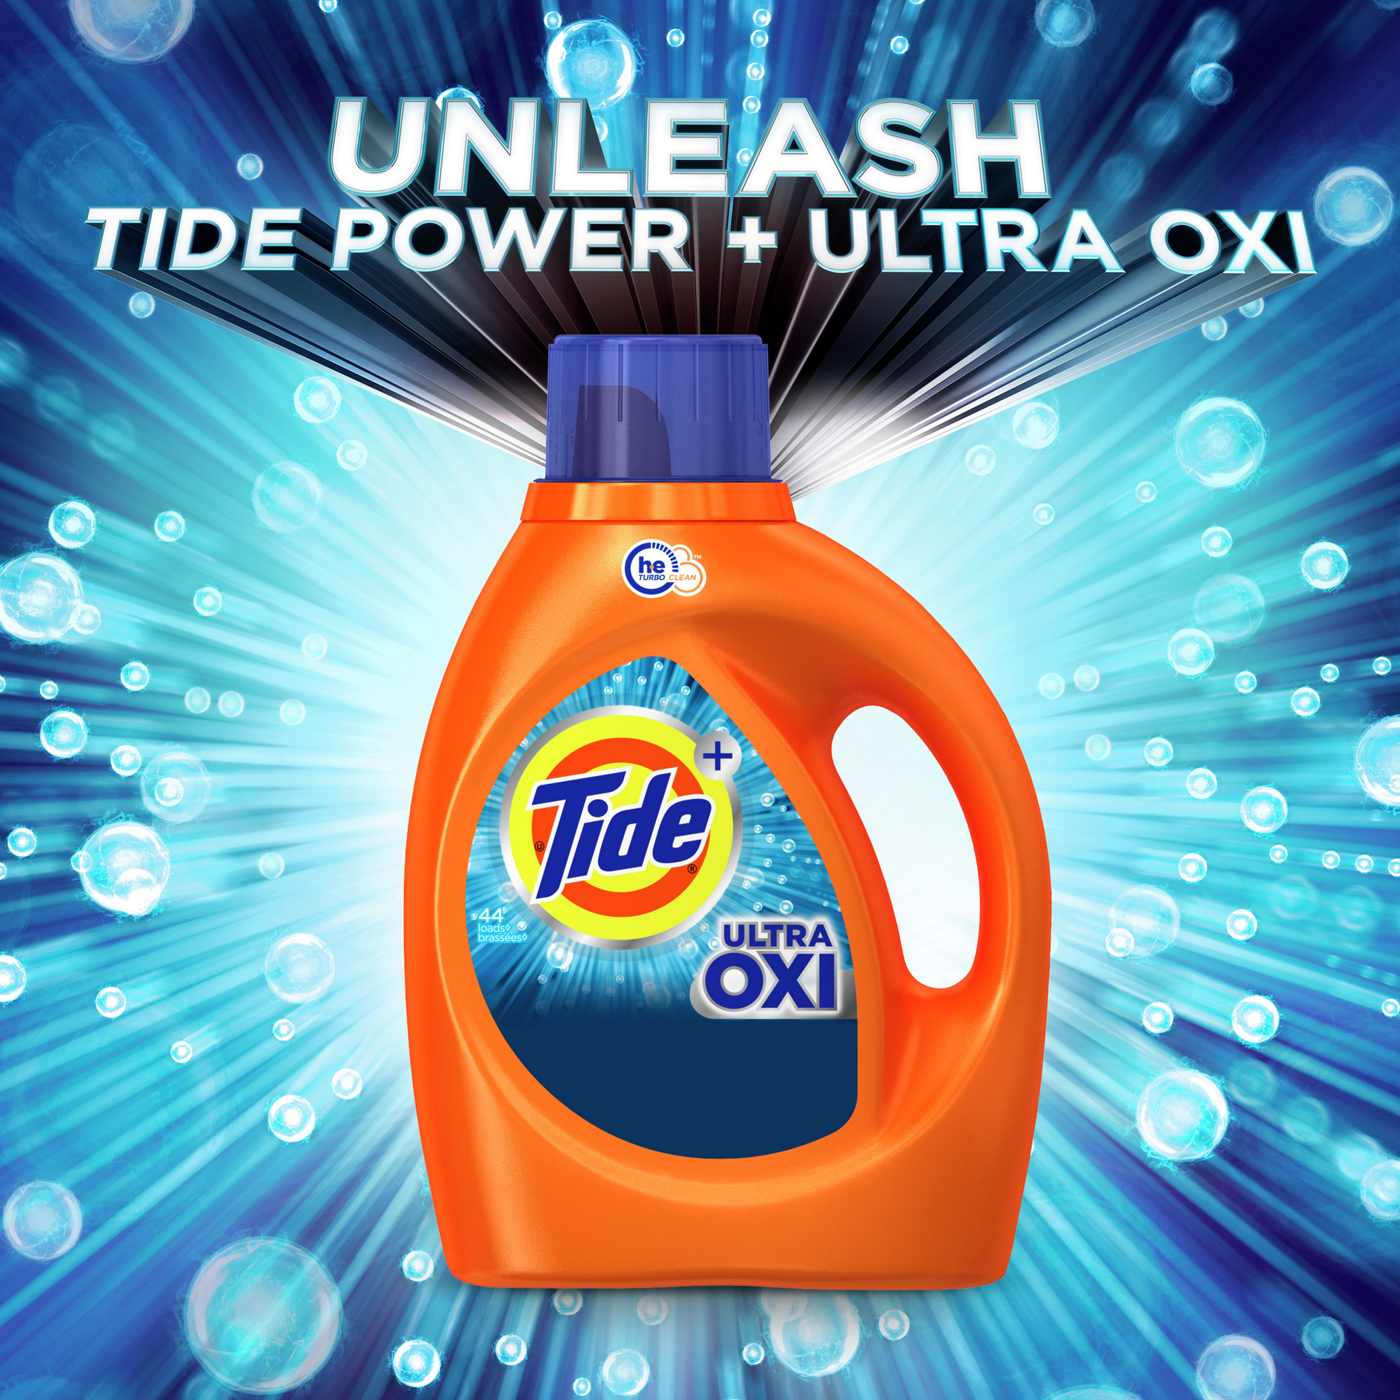 Tide + Ultra OXI HE Turbo Clean Liquid Laundry Detergent, 59 Loads; image 3 of 9